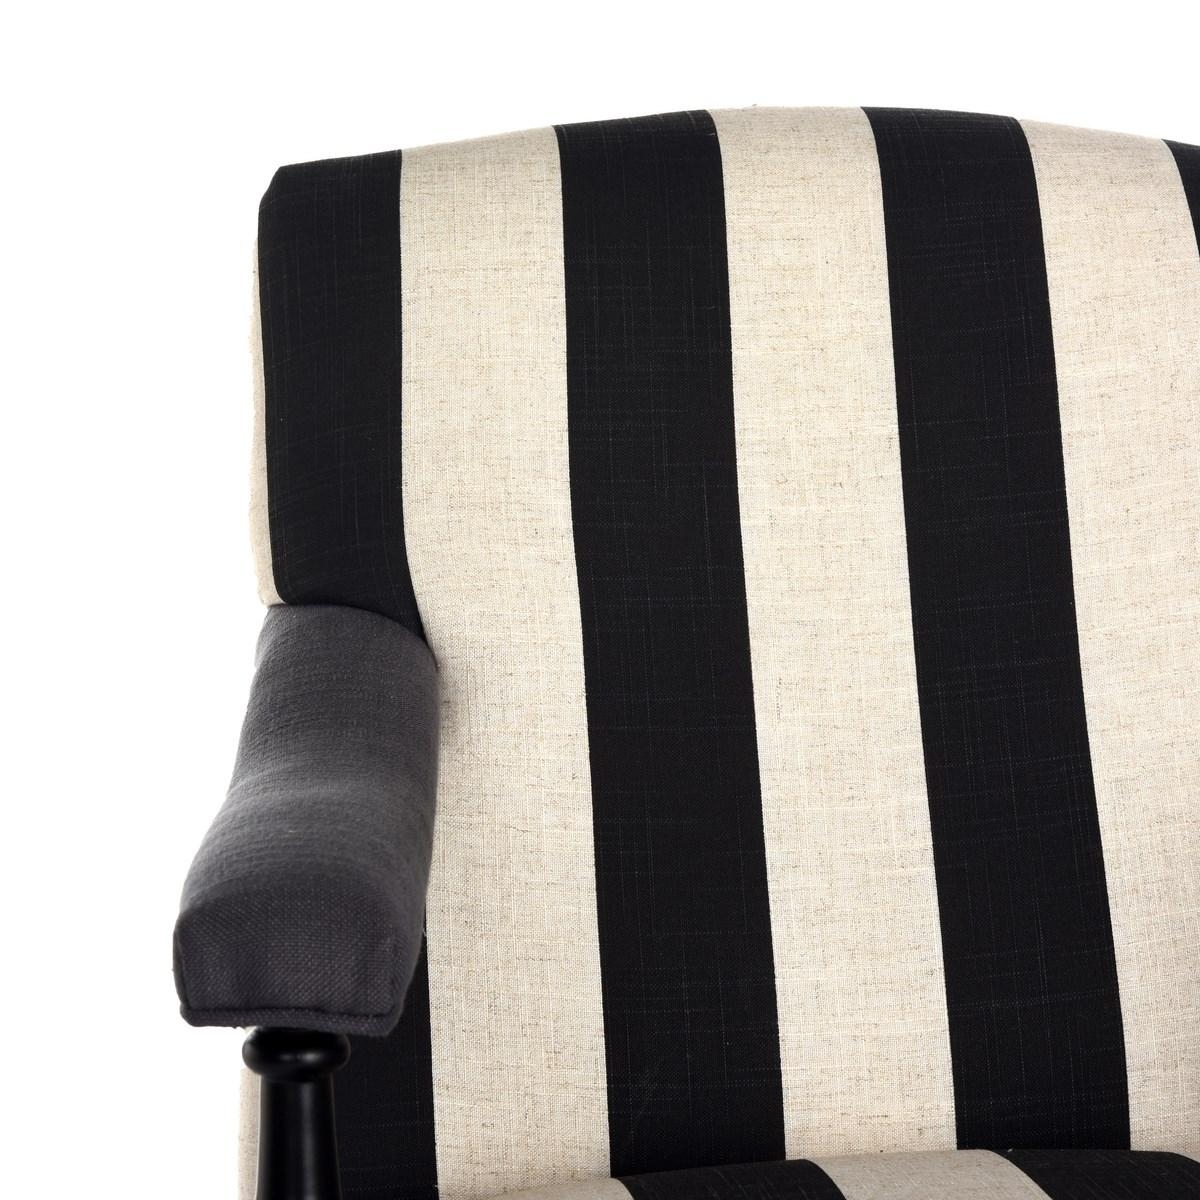 Devona Awning Stripe Arm Chair - Silver Nail Heads - Charcoal/White - Arlo Home - Image 3